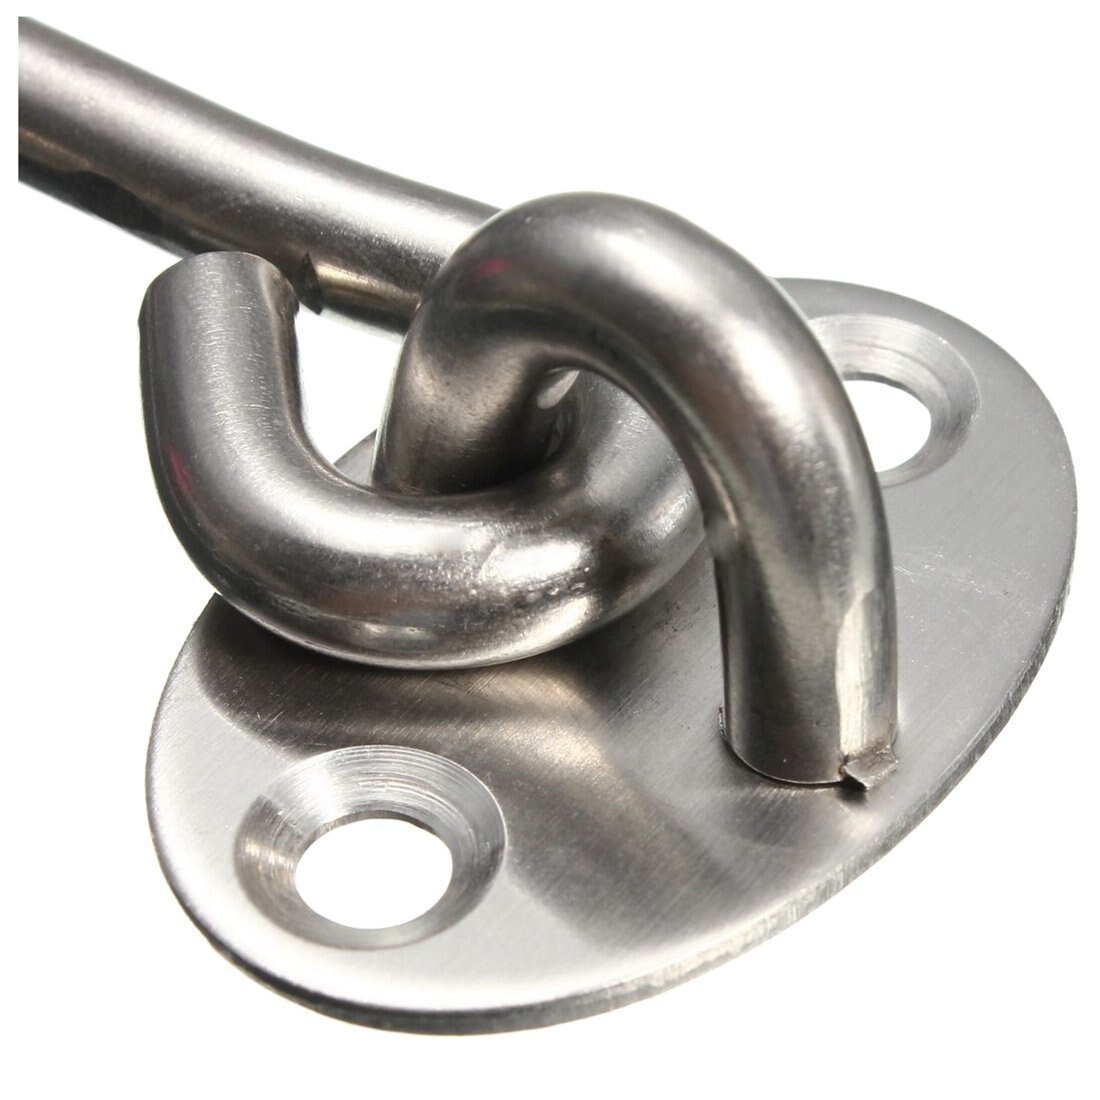 Stainless Steel Heavy Duty Cabin Hook and Eye Lock for Shed, Gate or Garage Door (200 mm/8 inch)